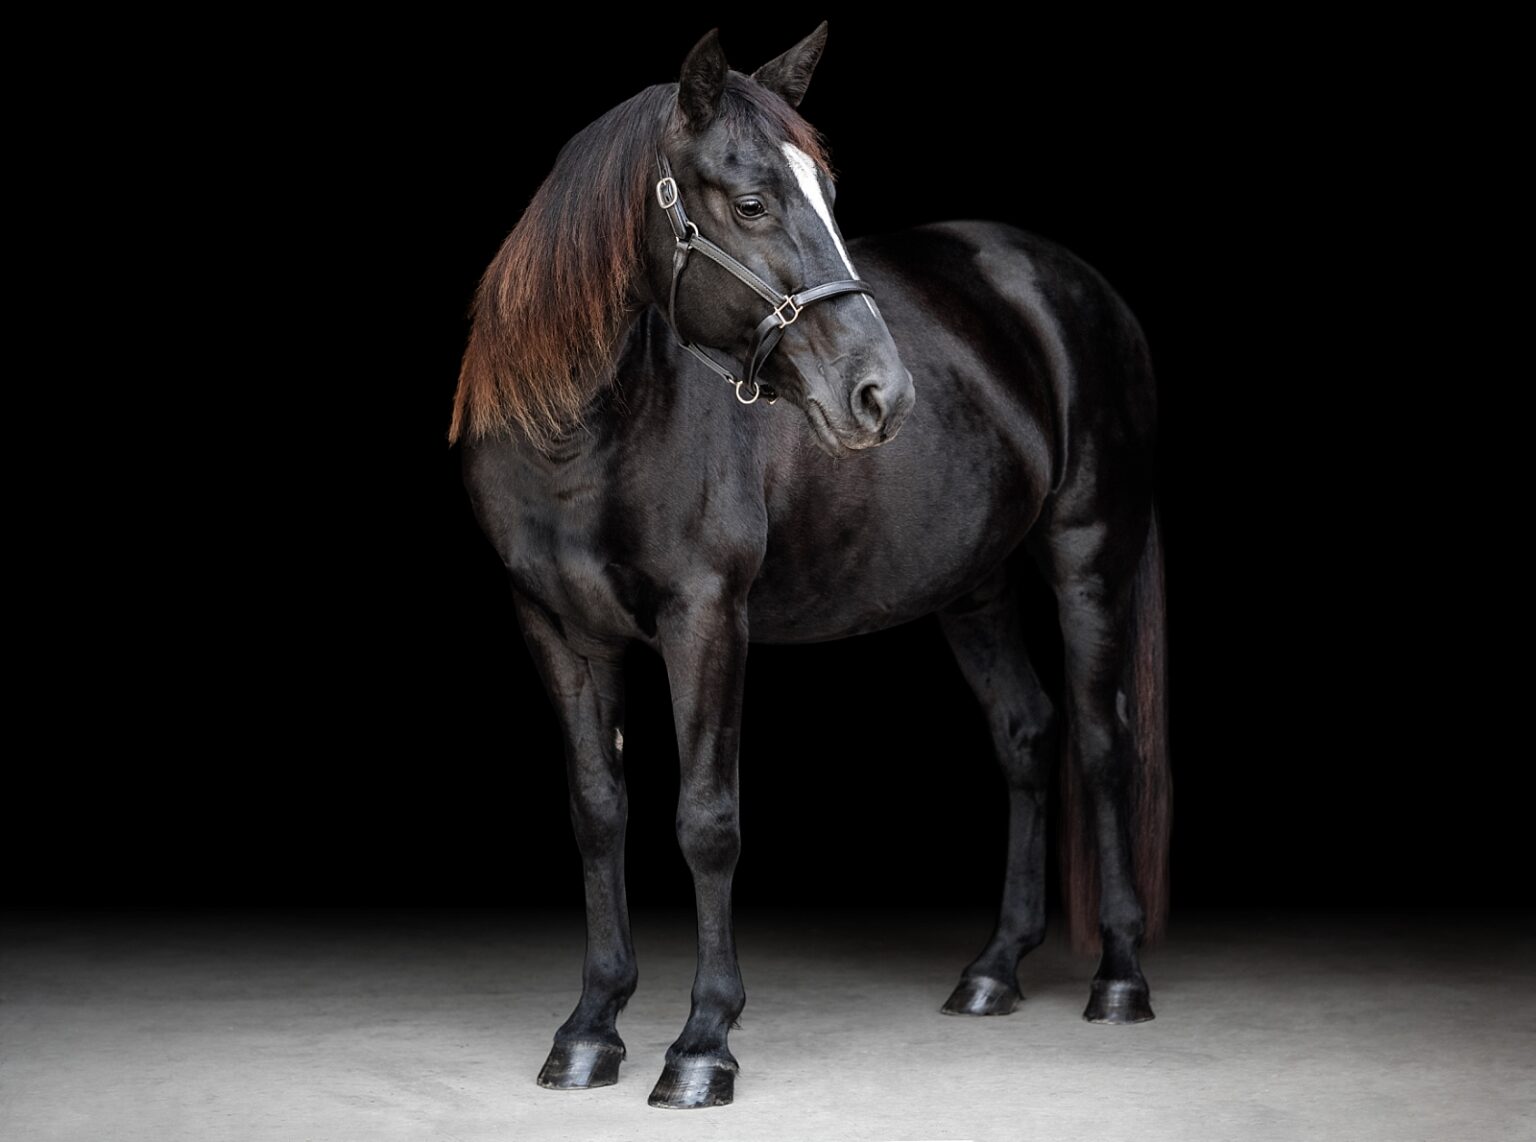 Black Tennessee Walking Horse mare photographed in South Georgia on a black background.